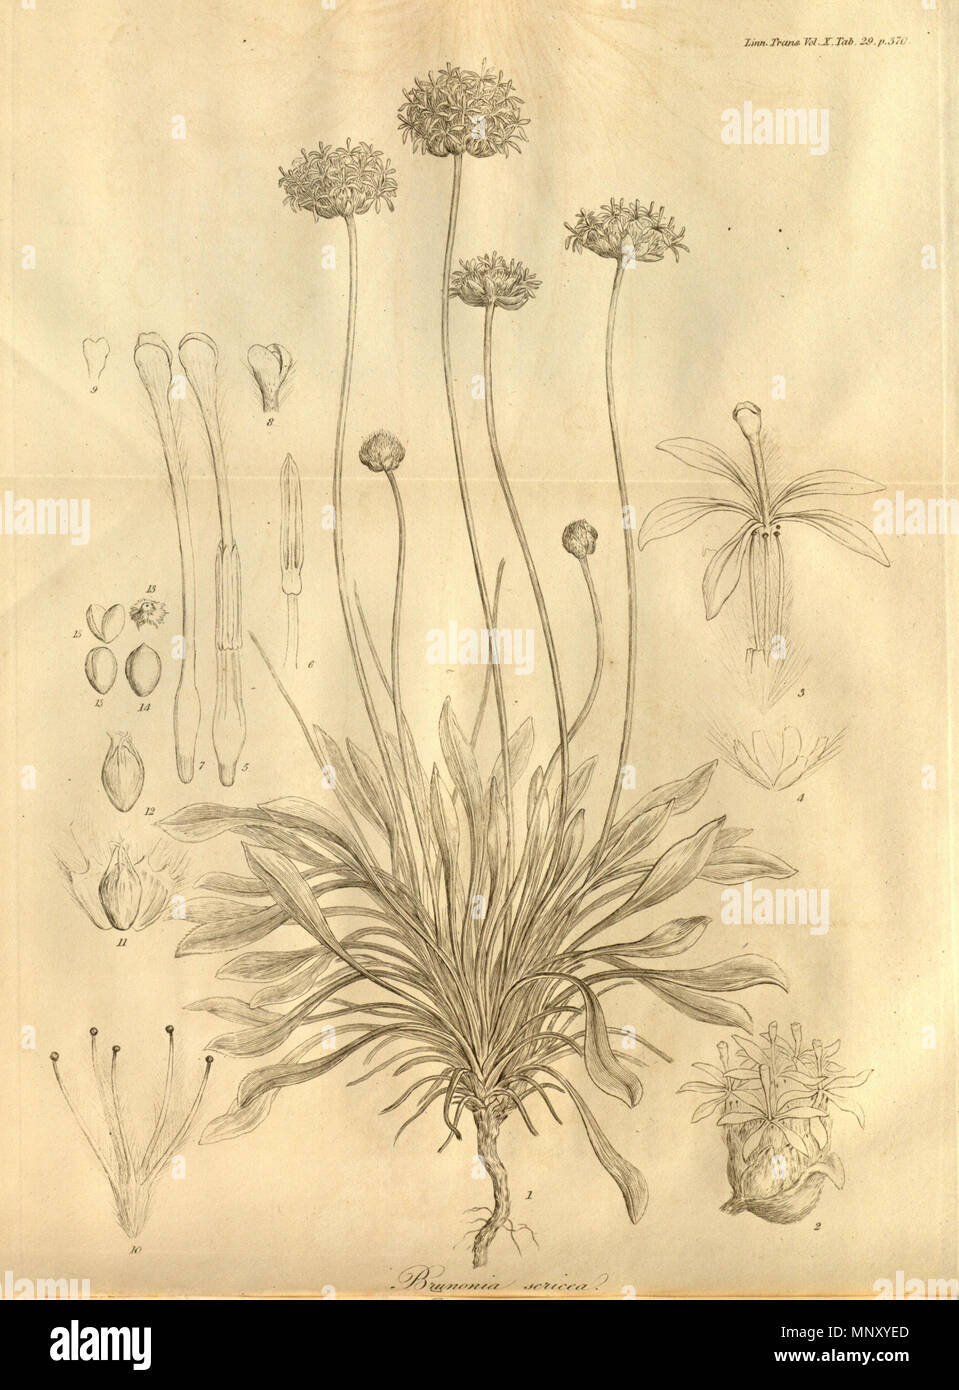 . This is Tab. 29 from Volume X of Transactions of the Linnean Society of London, published in 1811. It is an uncoloured copper plate executed by Ferdinand Bauer. The plant depicted is nominally Brunonia sericea, but this has since been relegated to a synonym of Brunonia australis. 1811. Ferdinand Bauer 1203 Transactions of the Linnean Society of London, Volume 10 - tab. 29 Stock Photo